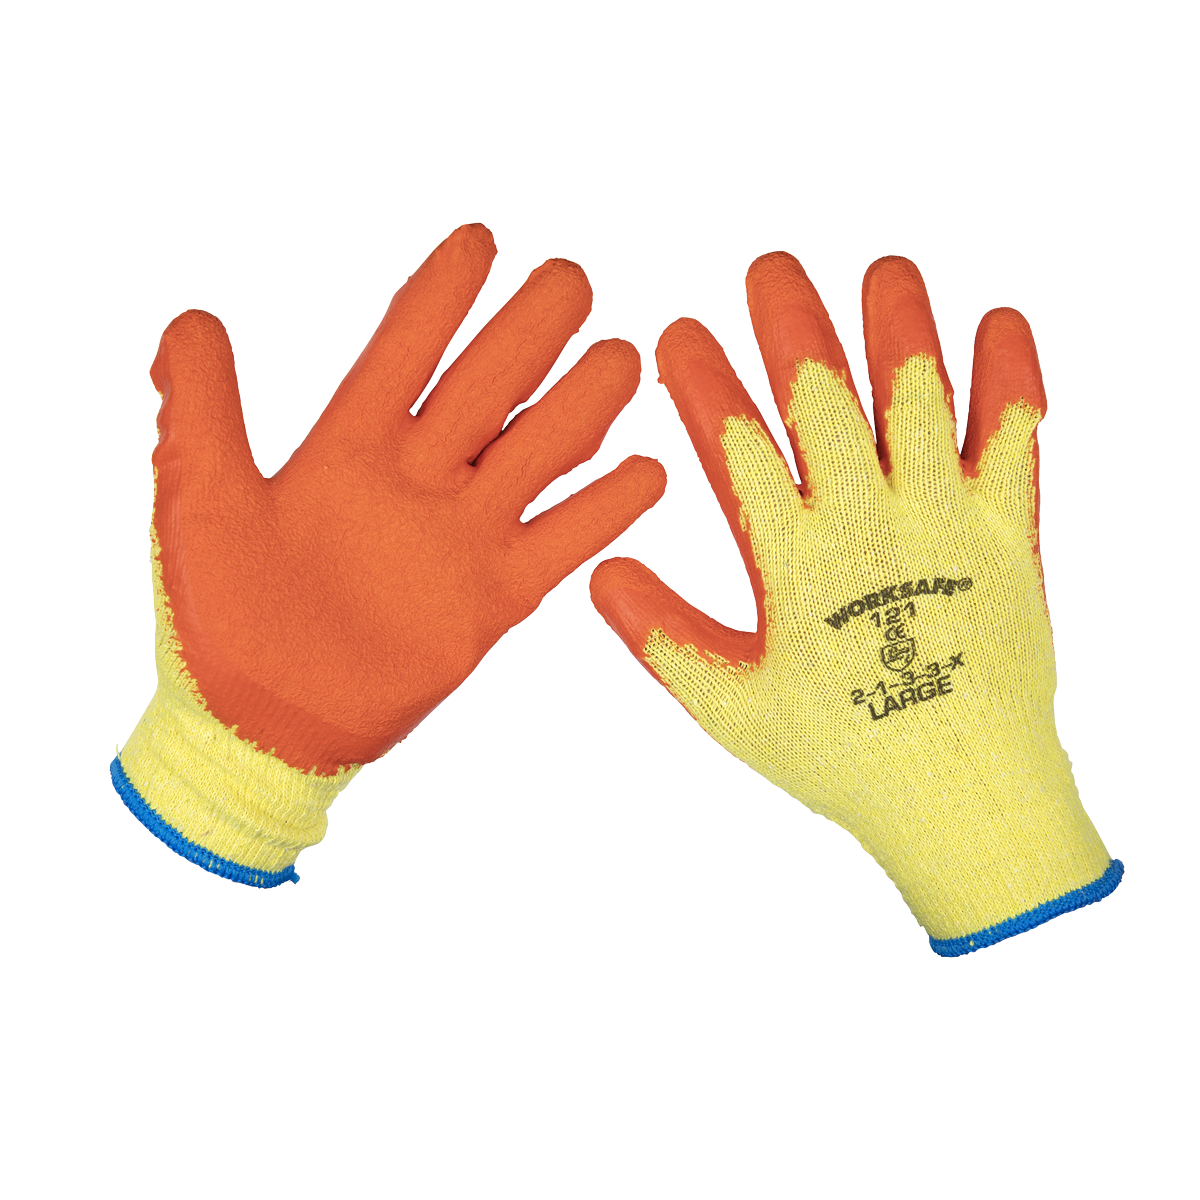 Super Grip Knitted Gloves Latex Palm (Large) - Pair - 9121L - Farming Parts